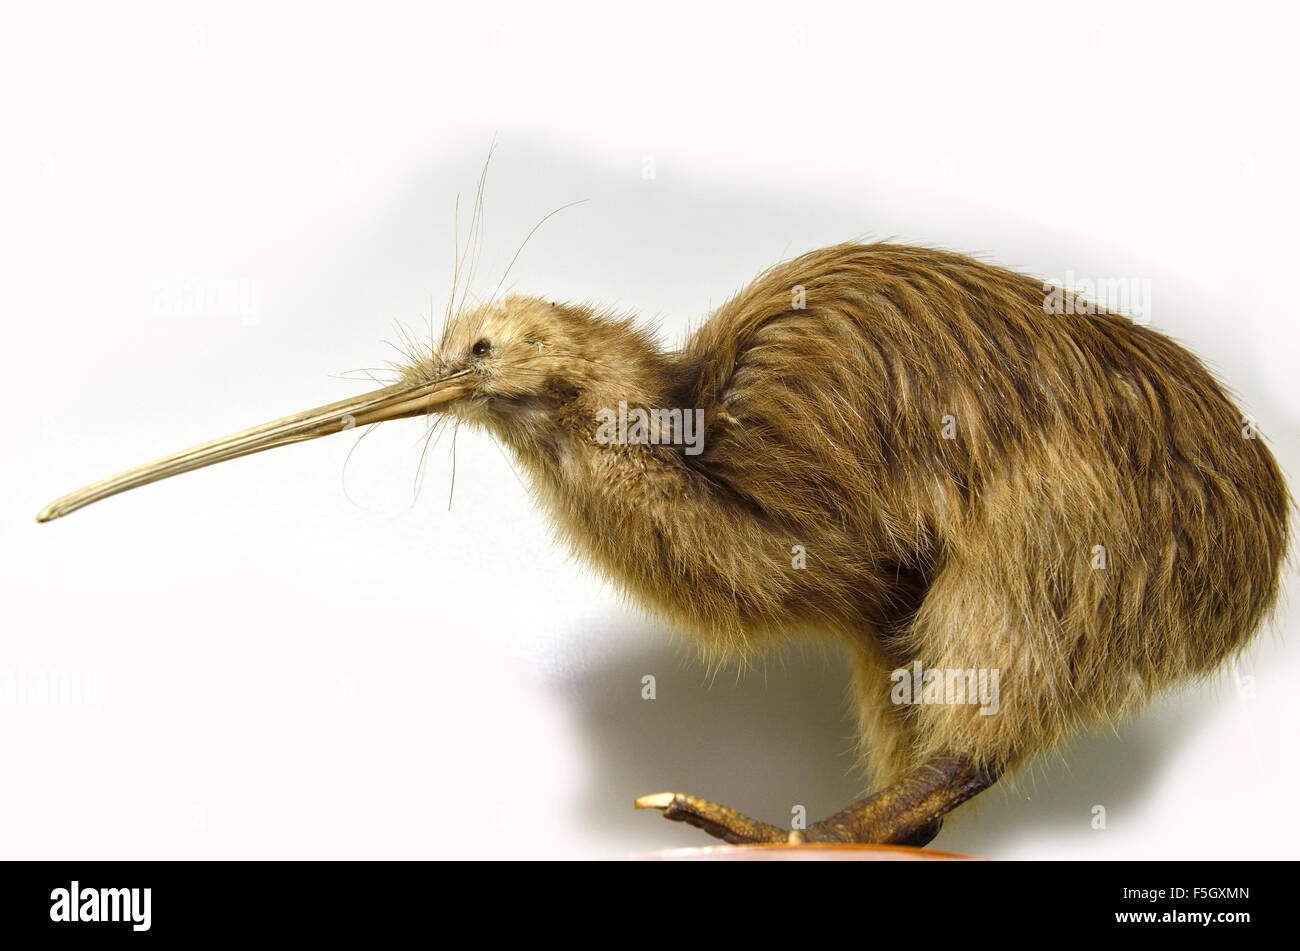 Stuffed and mounted specimen of a North Island brown kiwi, from its natural habitat in Trounson Kauri Park.northland.New Zealand Stock Photo